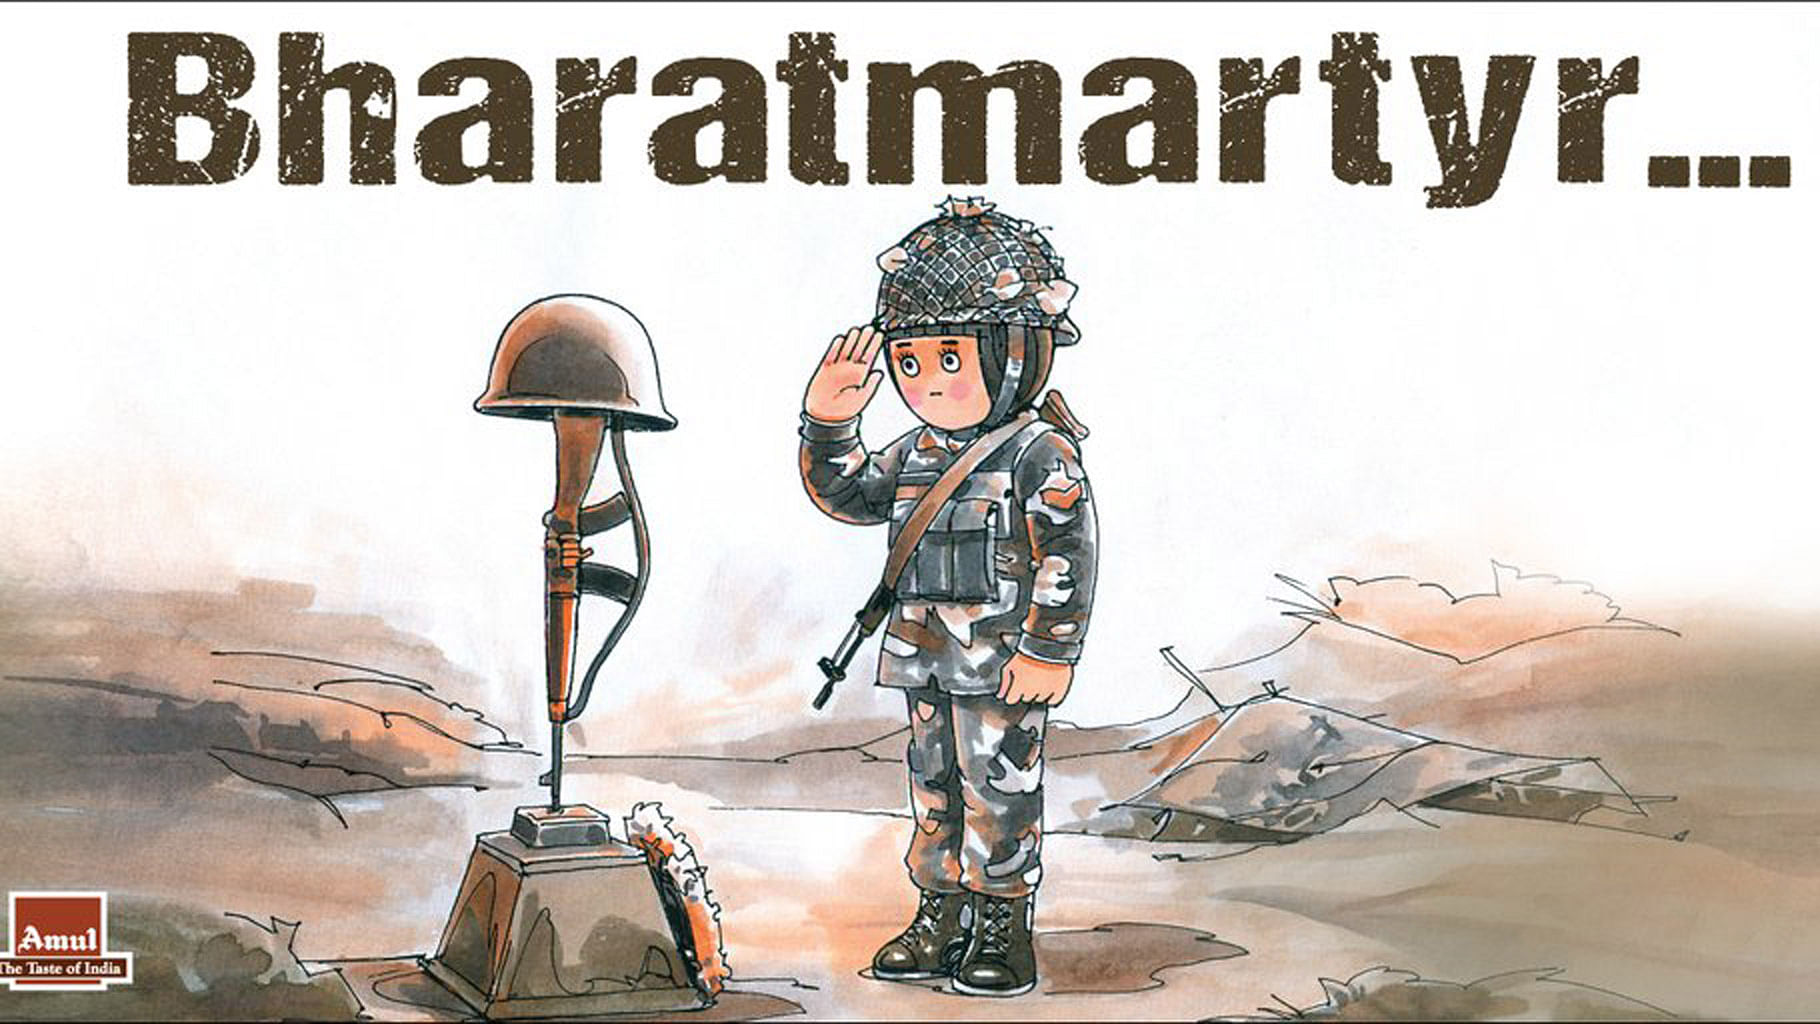 Amul pays tribute to the Pathankot martyrs (Photo: <a href="https://twitter.com/Amul_Coop">@Amul_Coop</a>/Twitter)